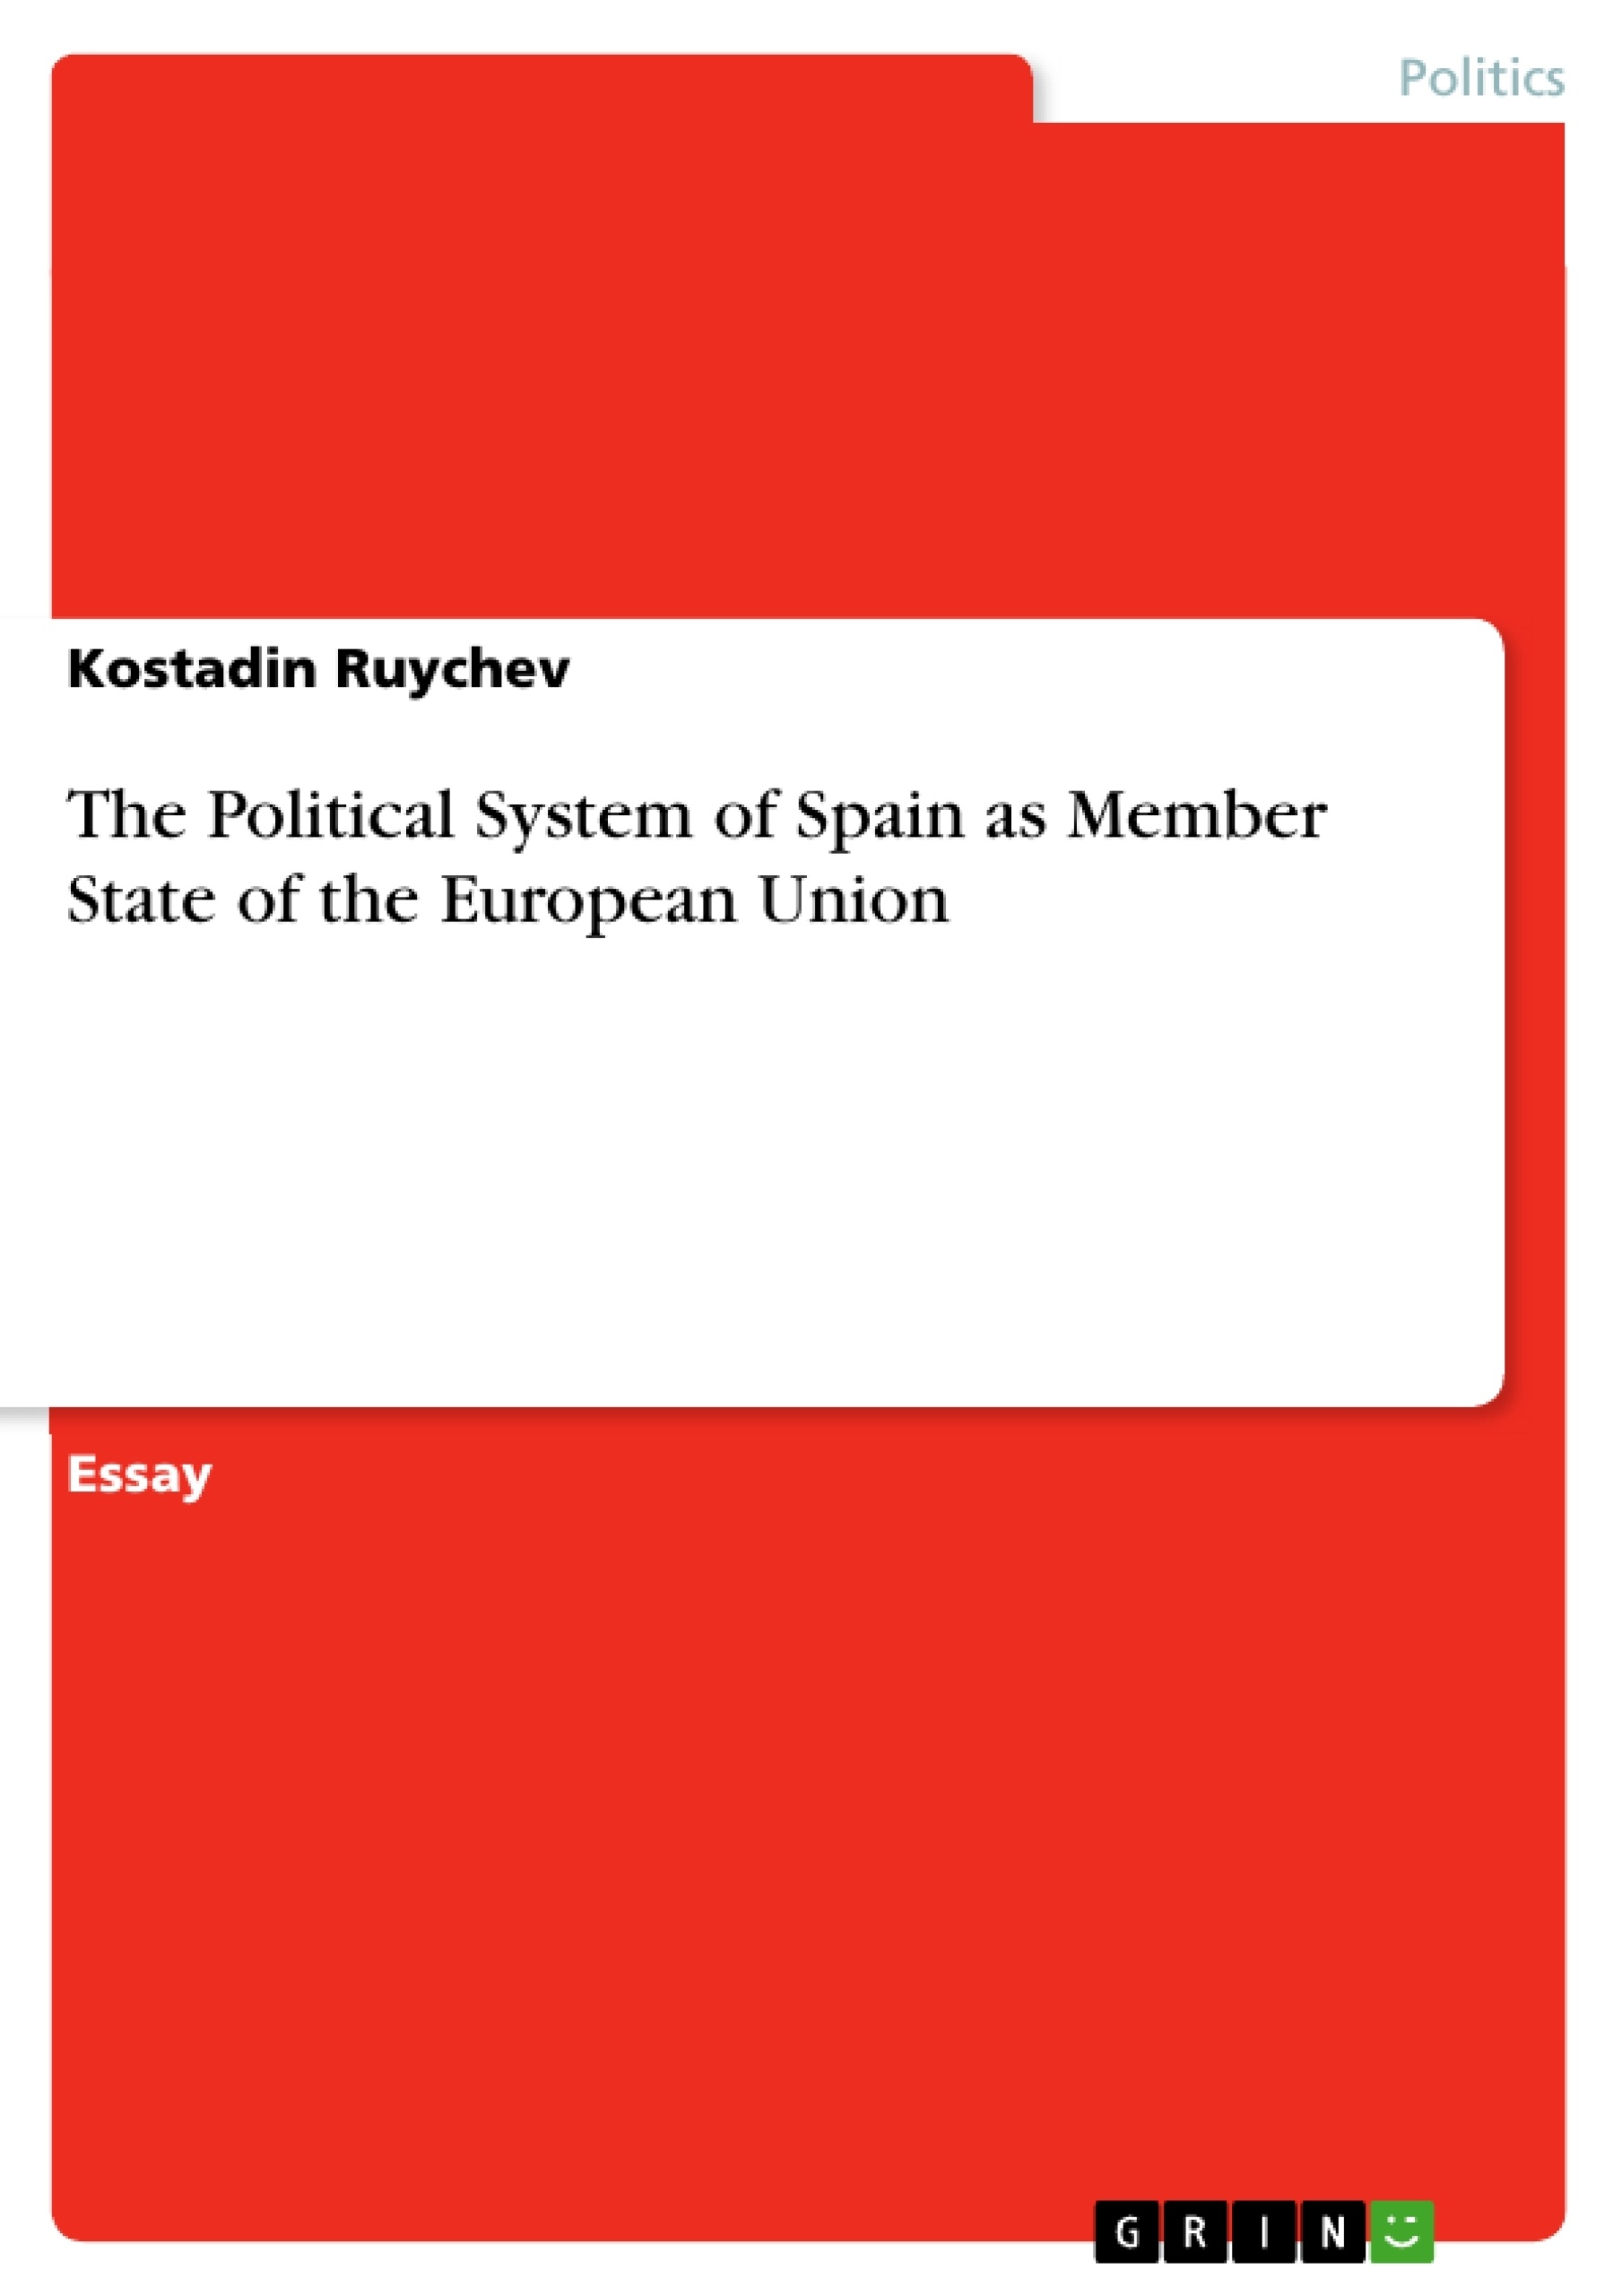 Título: The Political System of Spain as Member State of the European Union